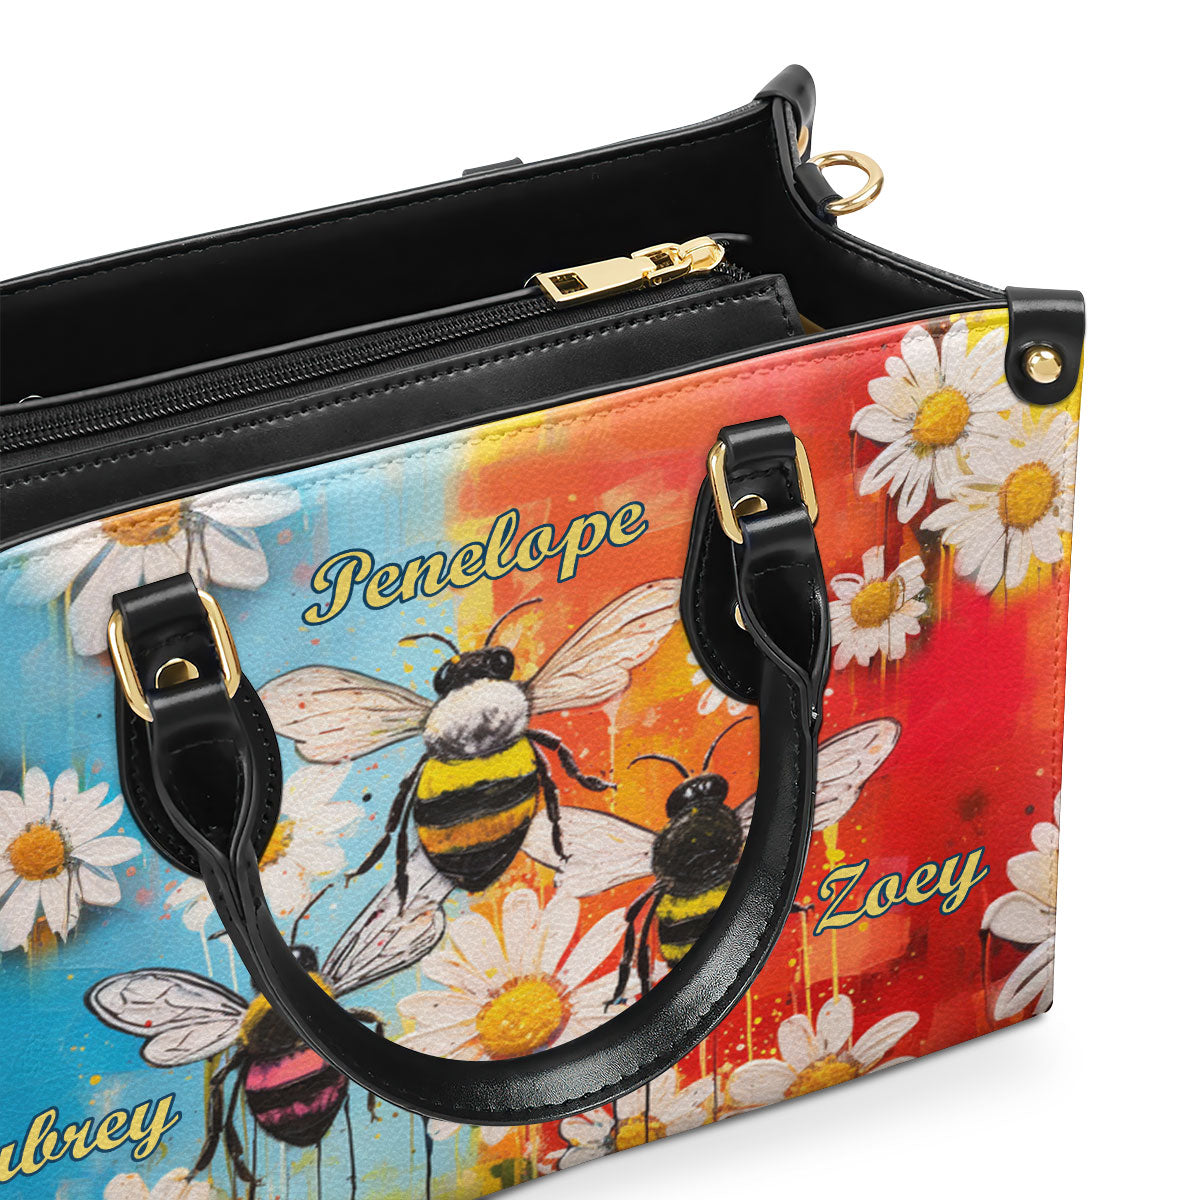 3 Bees - Personalized Leather Handbag MS-NH1631